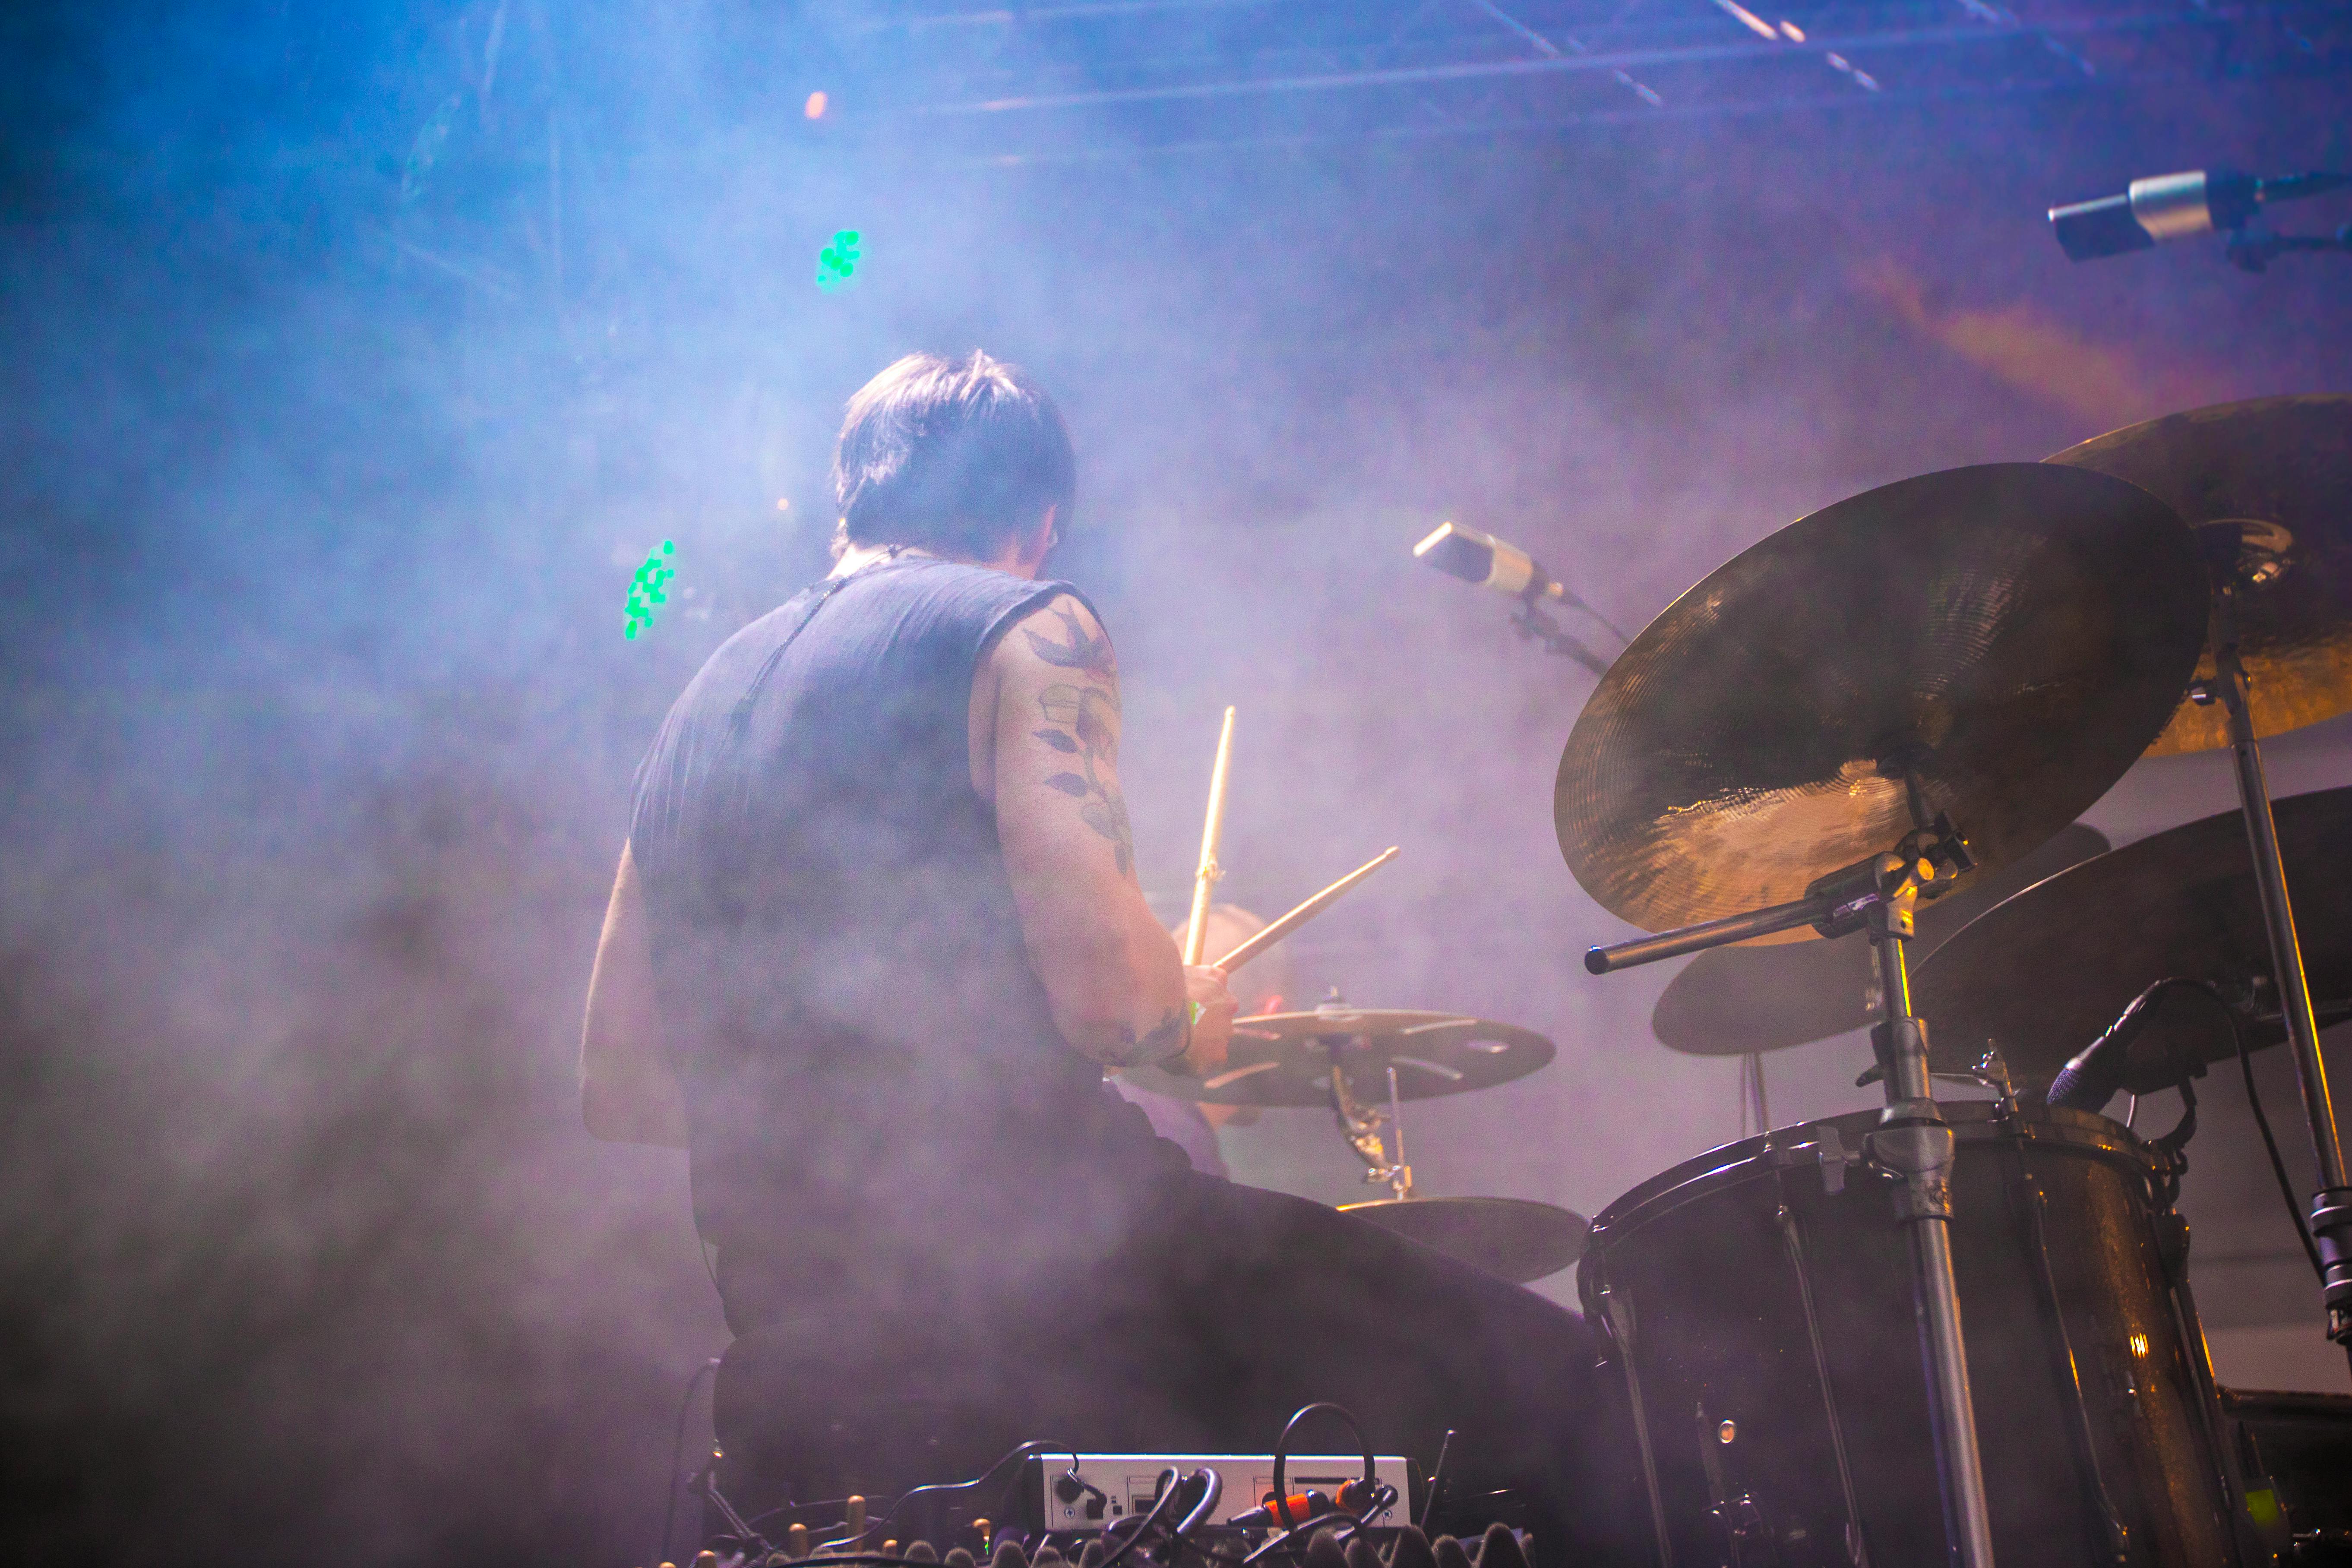 Performing Drummer Surrounded by Fogs